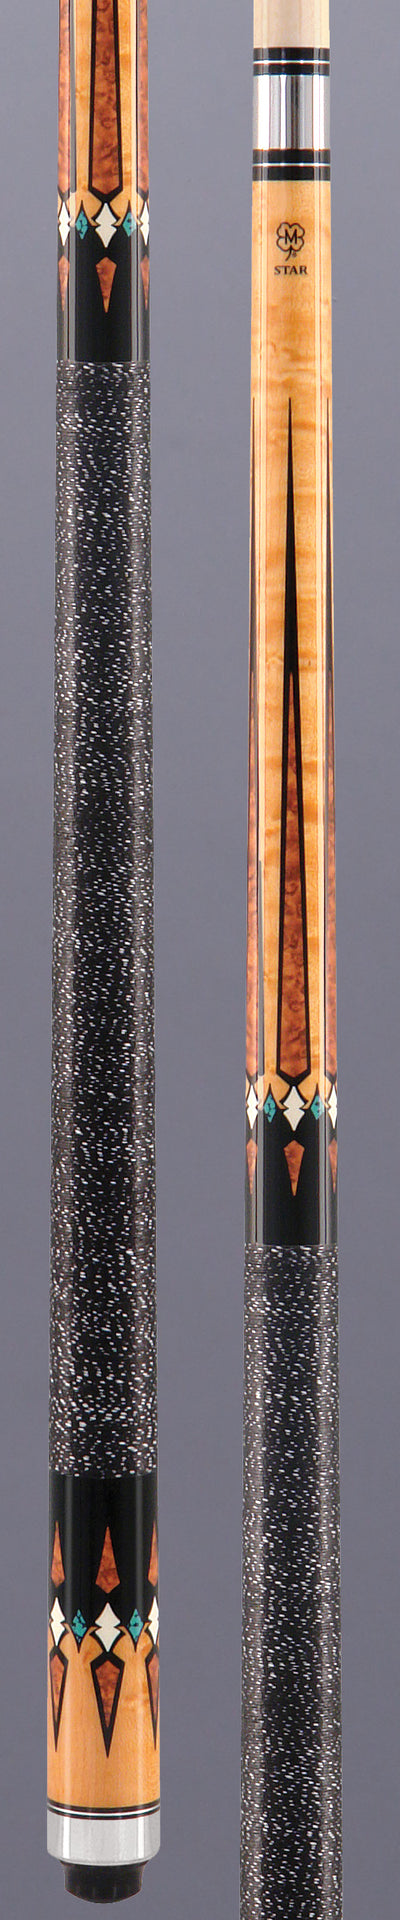 Star S11 Star Cue Honey Stained